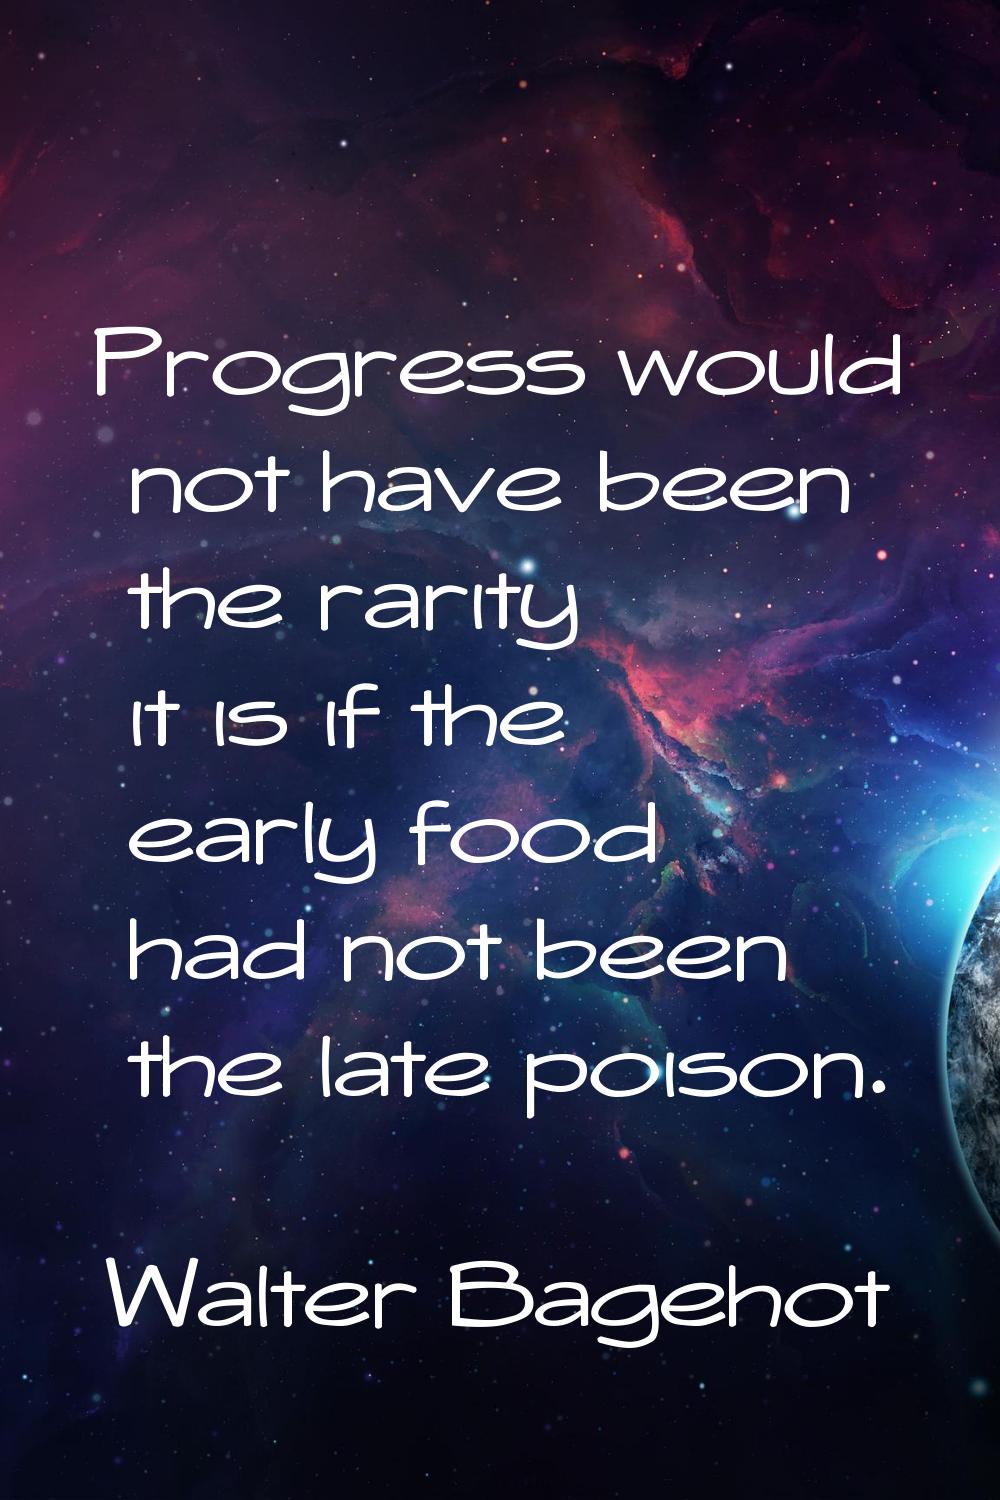 Progress would not have been the rarity it is if the early food had not been the late poison.